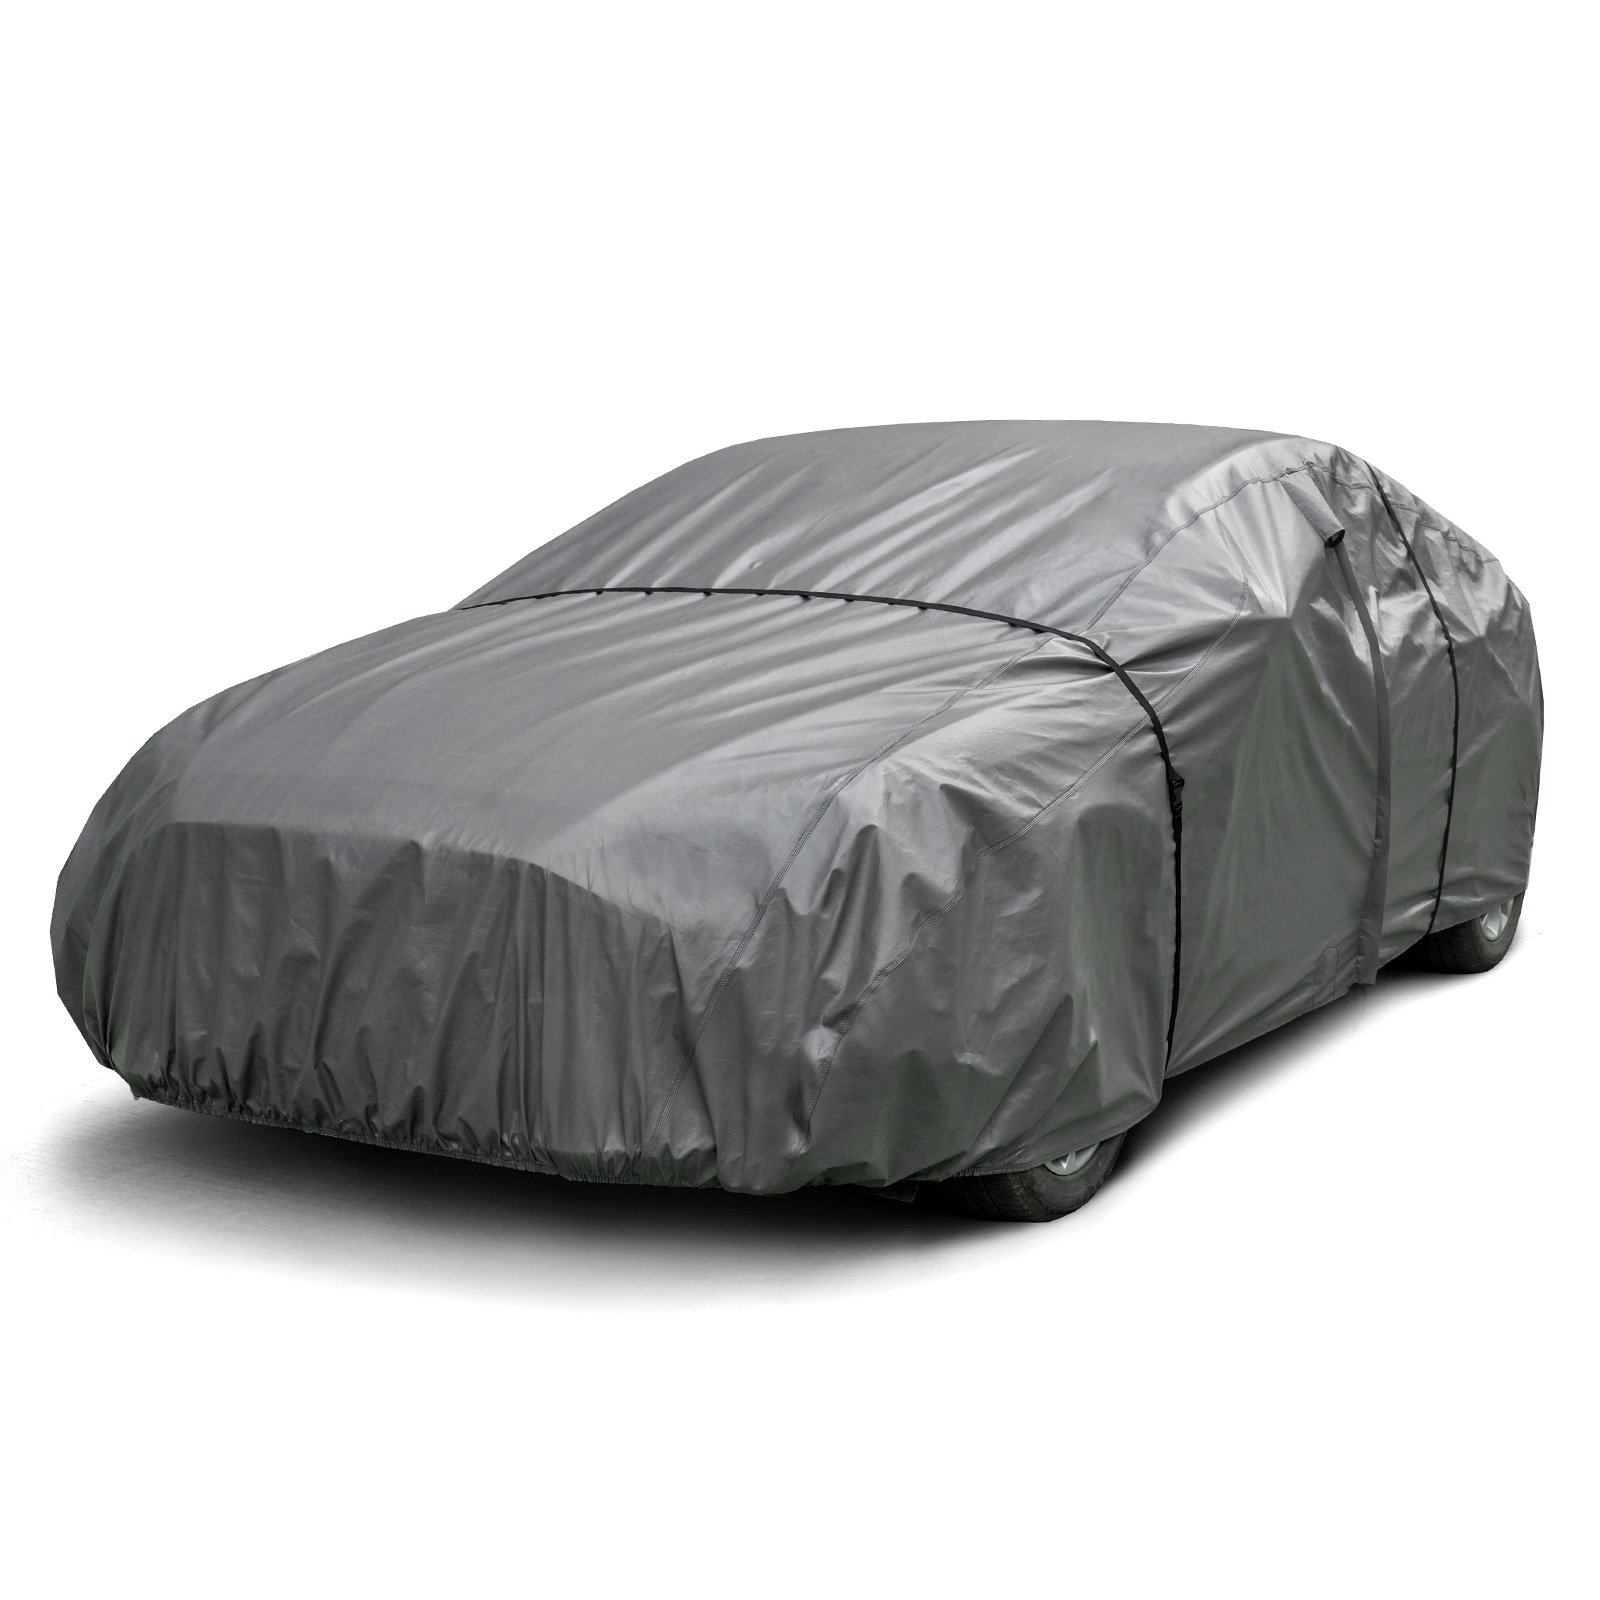 Wholesale 100% Waterproof Car Cover with Zipper Door Two Extra Windproof  Tie Down Straps Air Ventilation Window Sedan car cover manufacturers and  suppliers